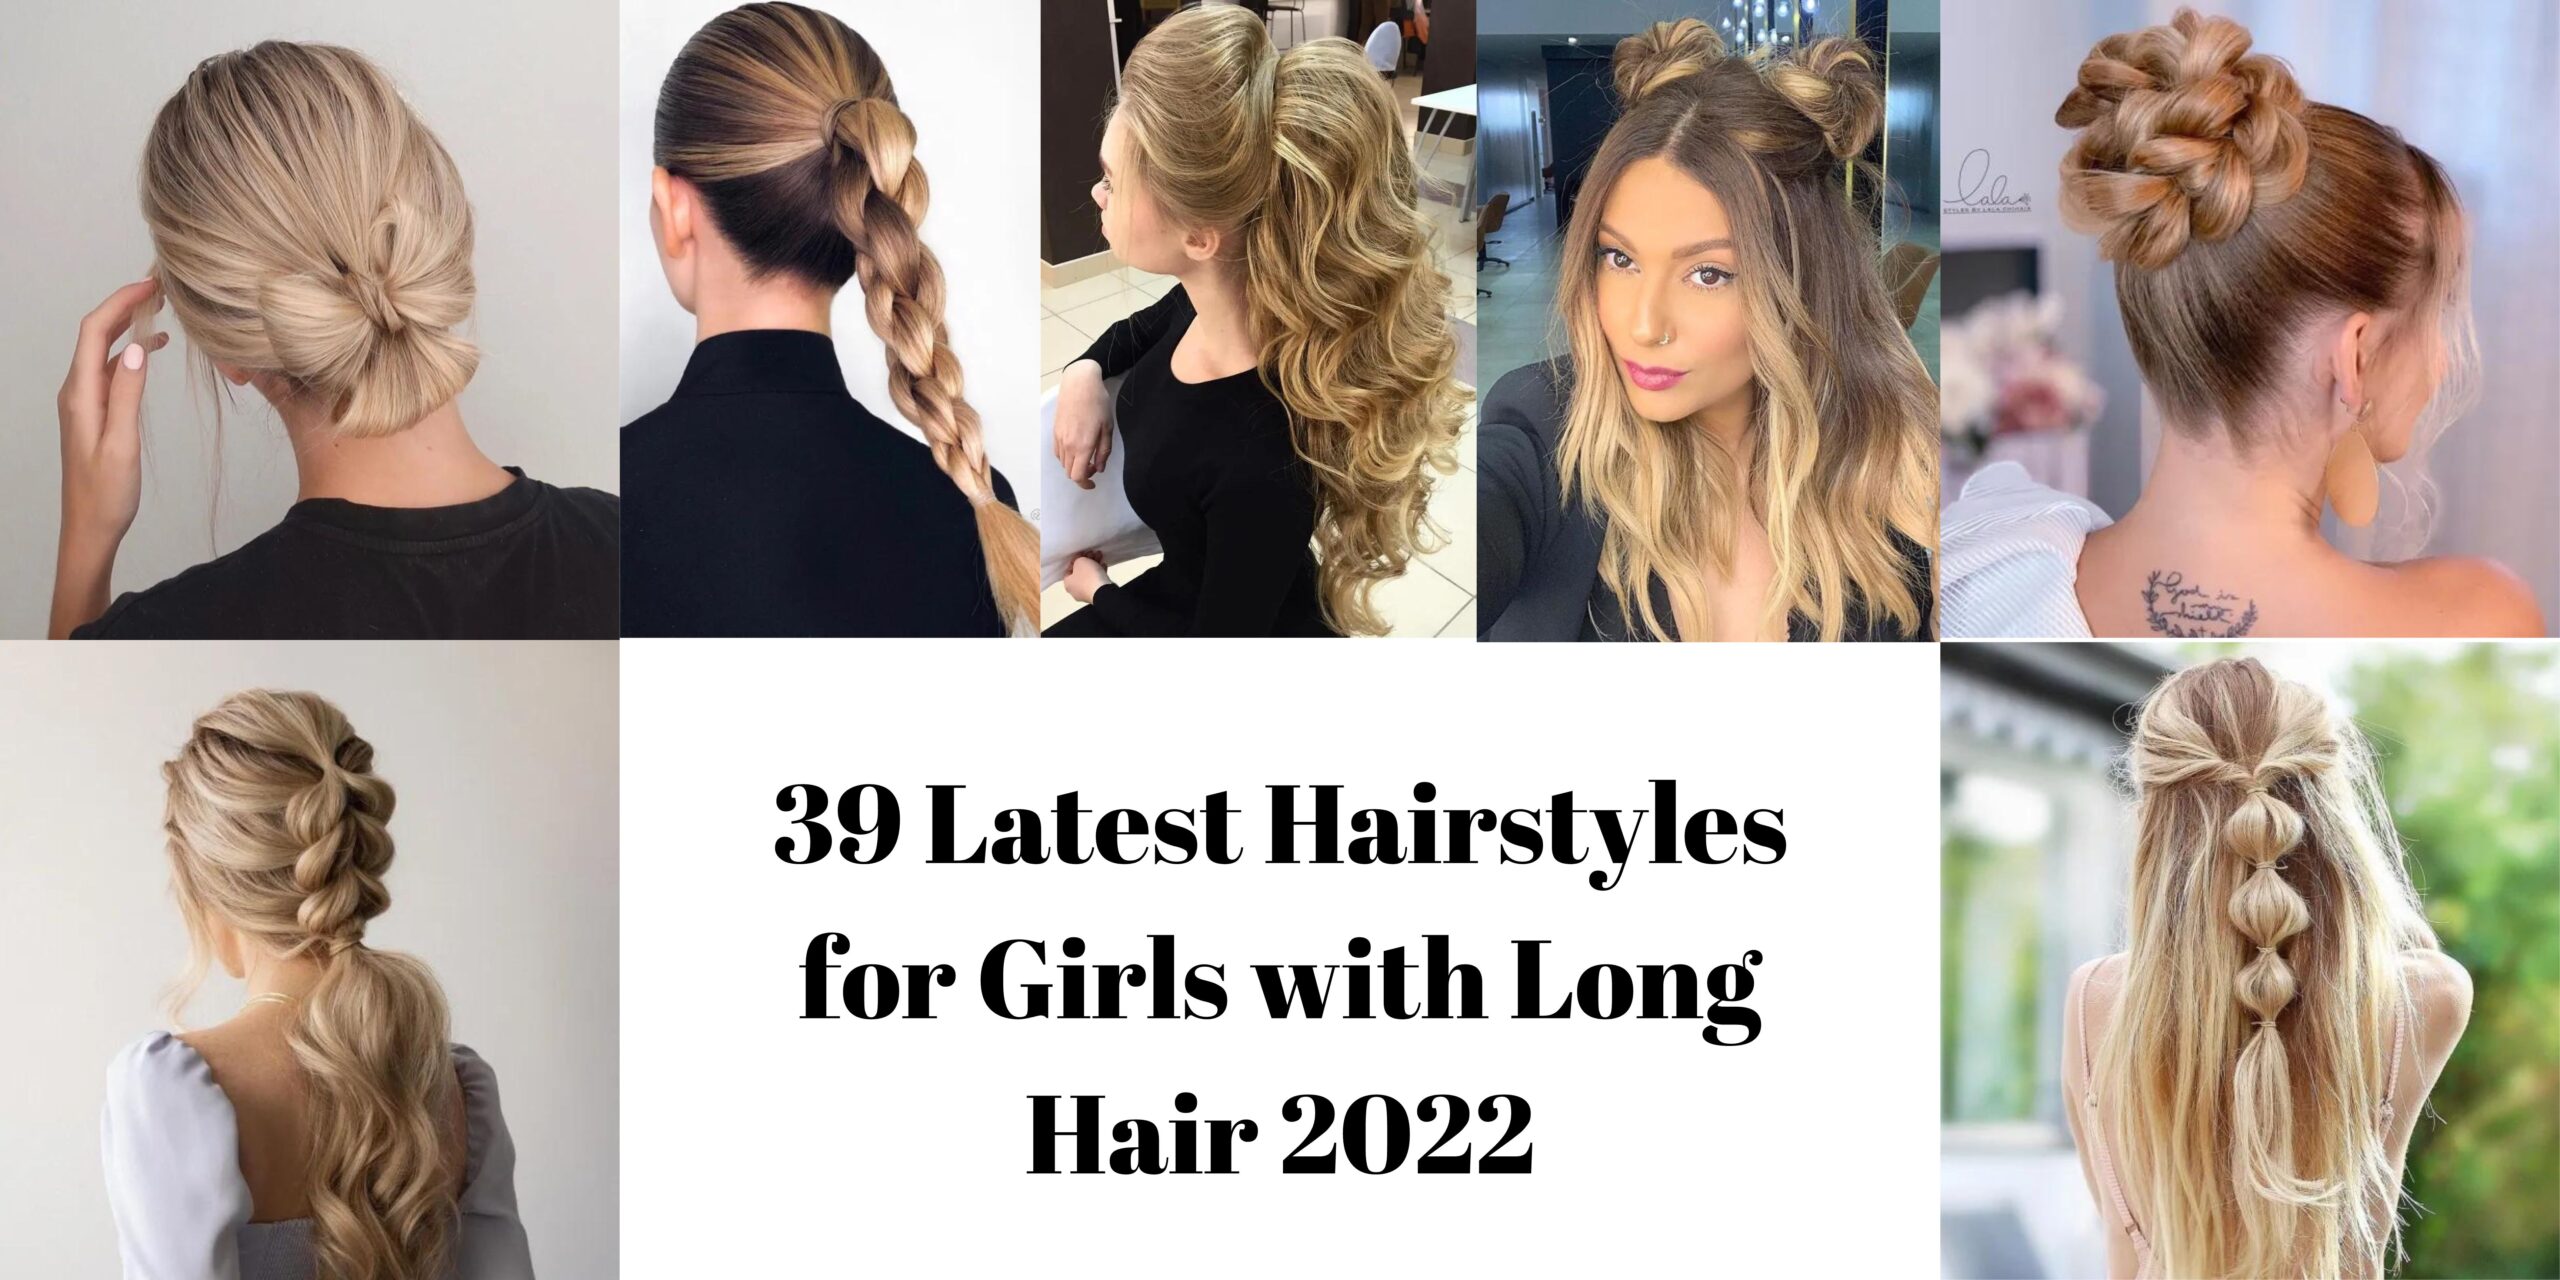 Descubra 100 image long hairstyle for girls 